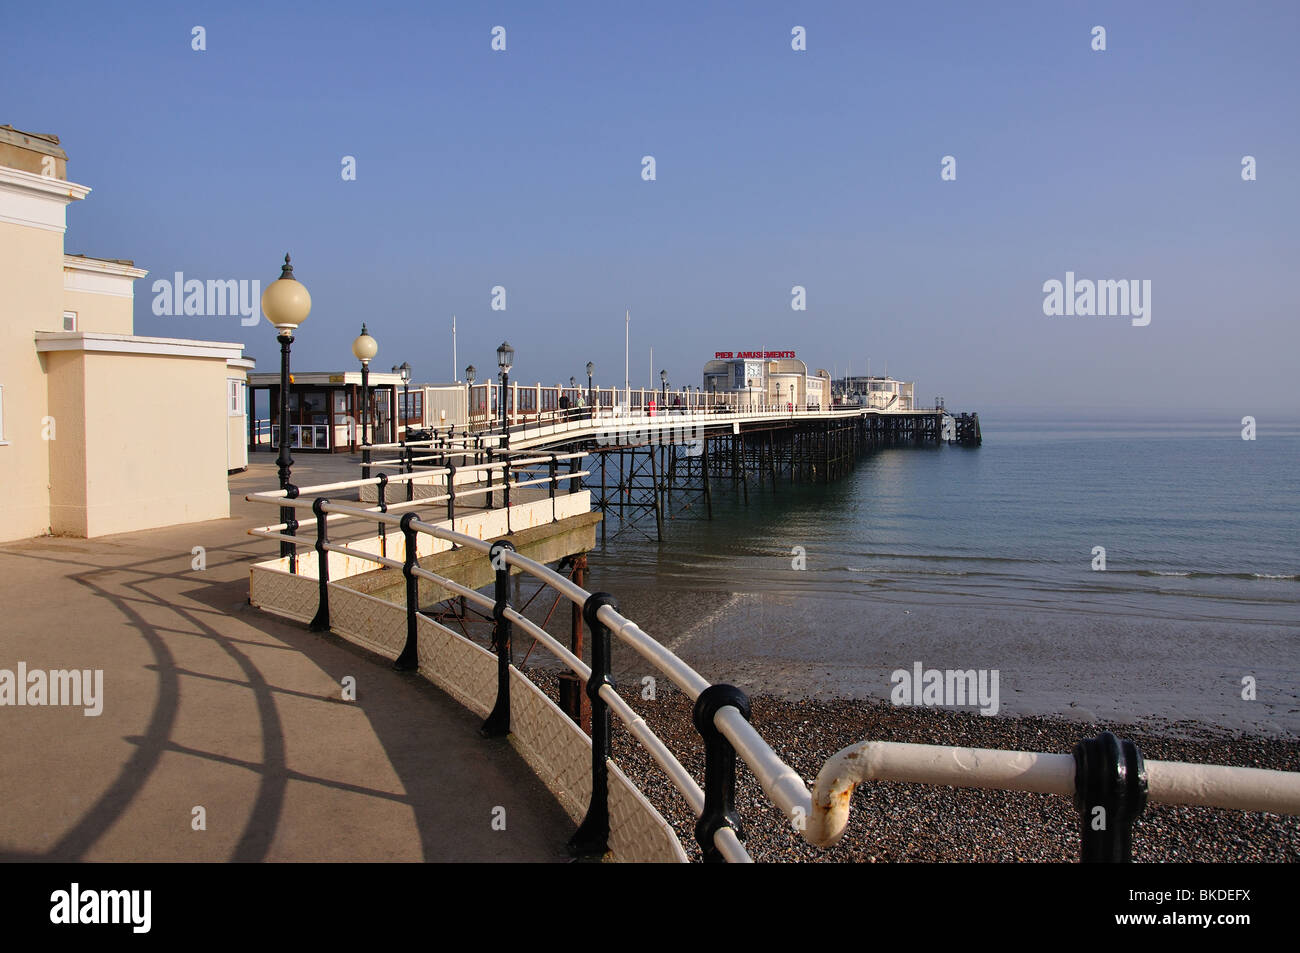 Worthing Pier al tramonto, Worthing, West Sussex, in Inghilterra, Regno Unito Foto Stock